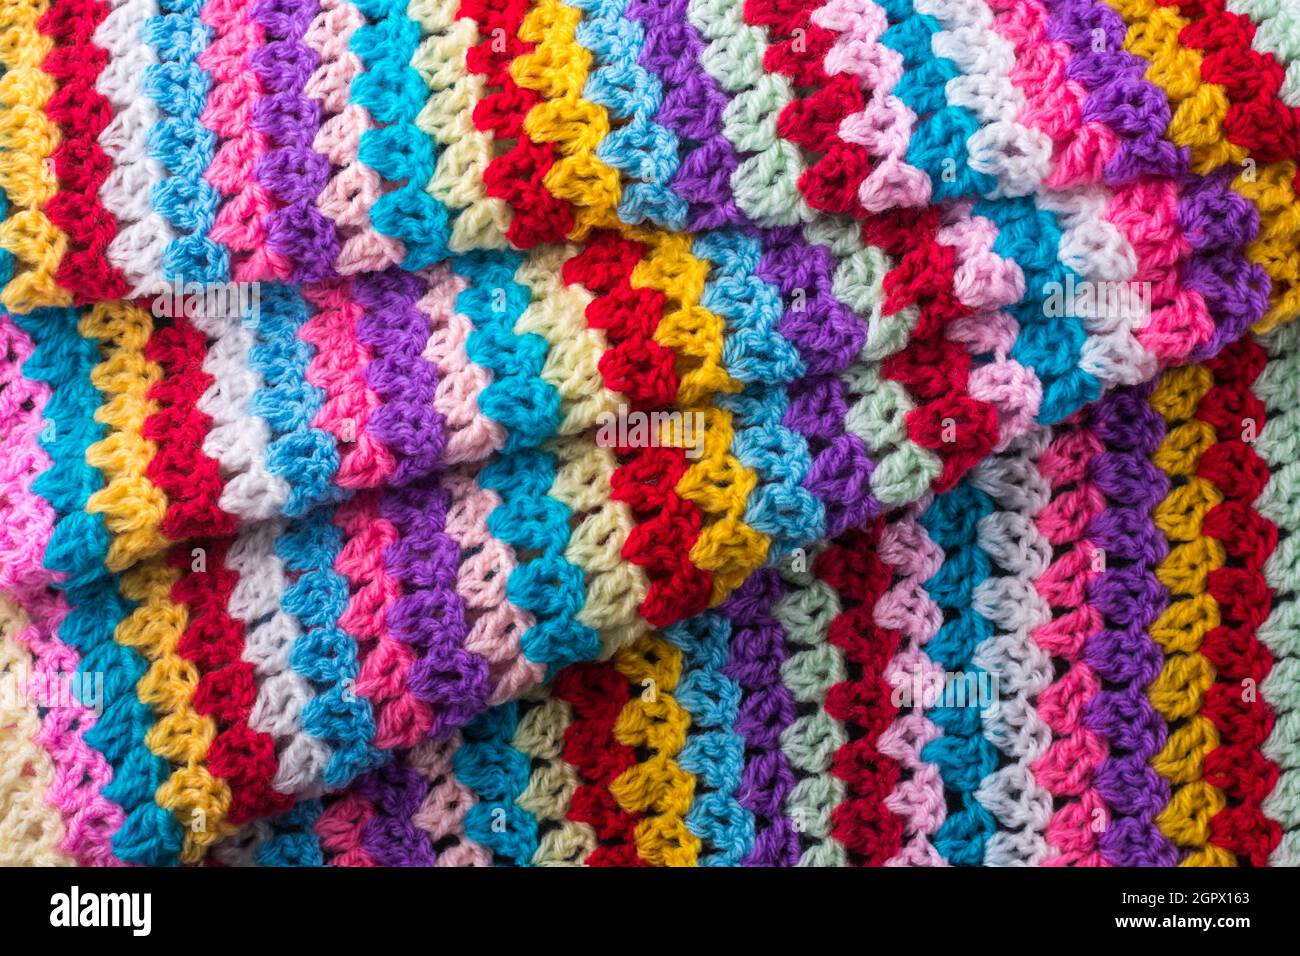 676,721 Wool Fabric Images, Stock Photos, 3D objects, & Vectors